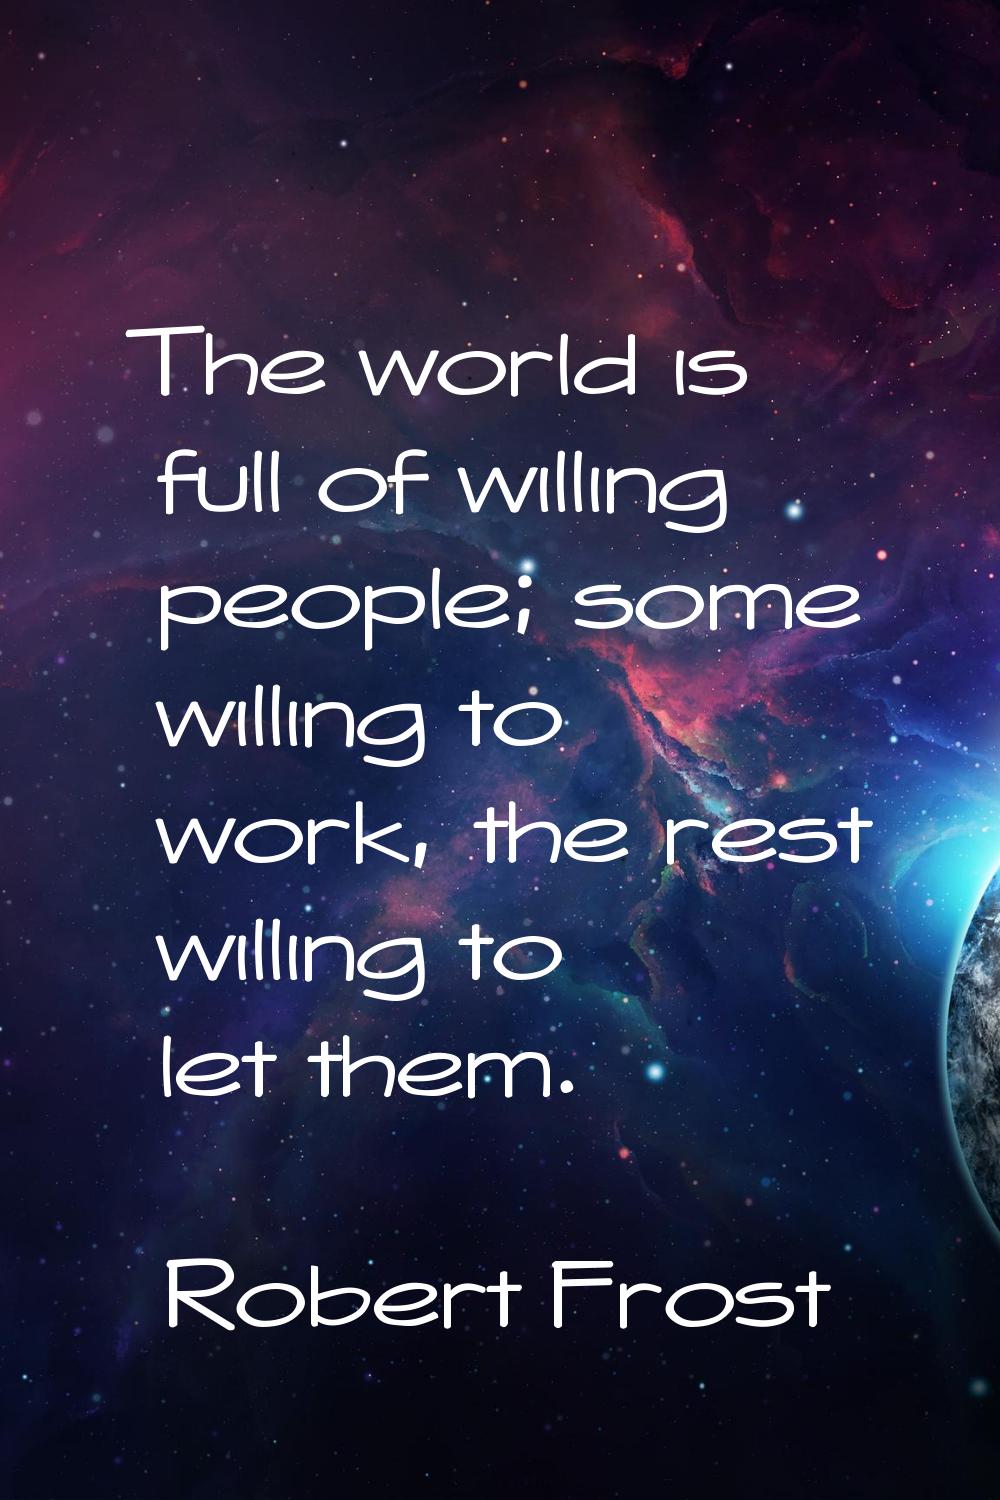 The world is full of willing people; some willing to work, the rest willing to let them.